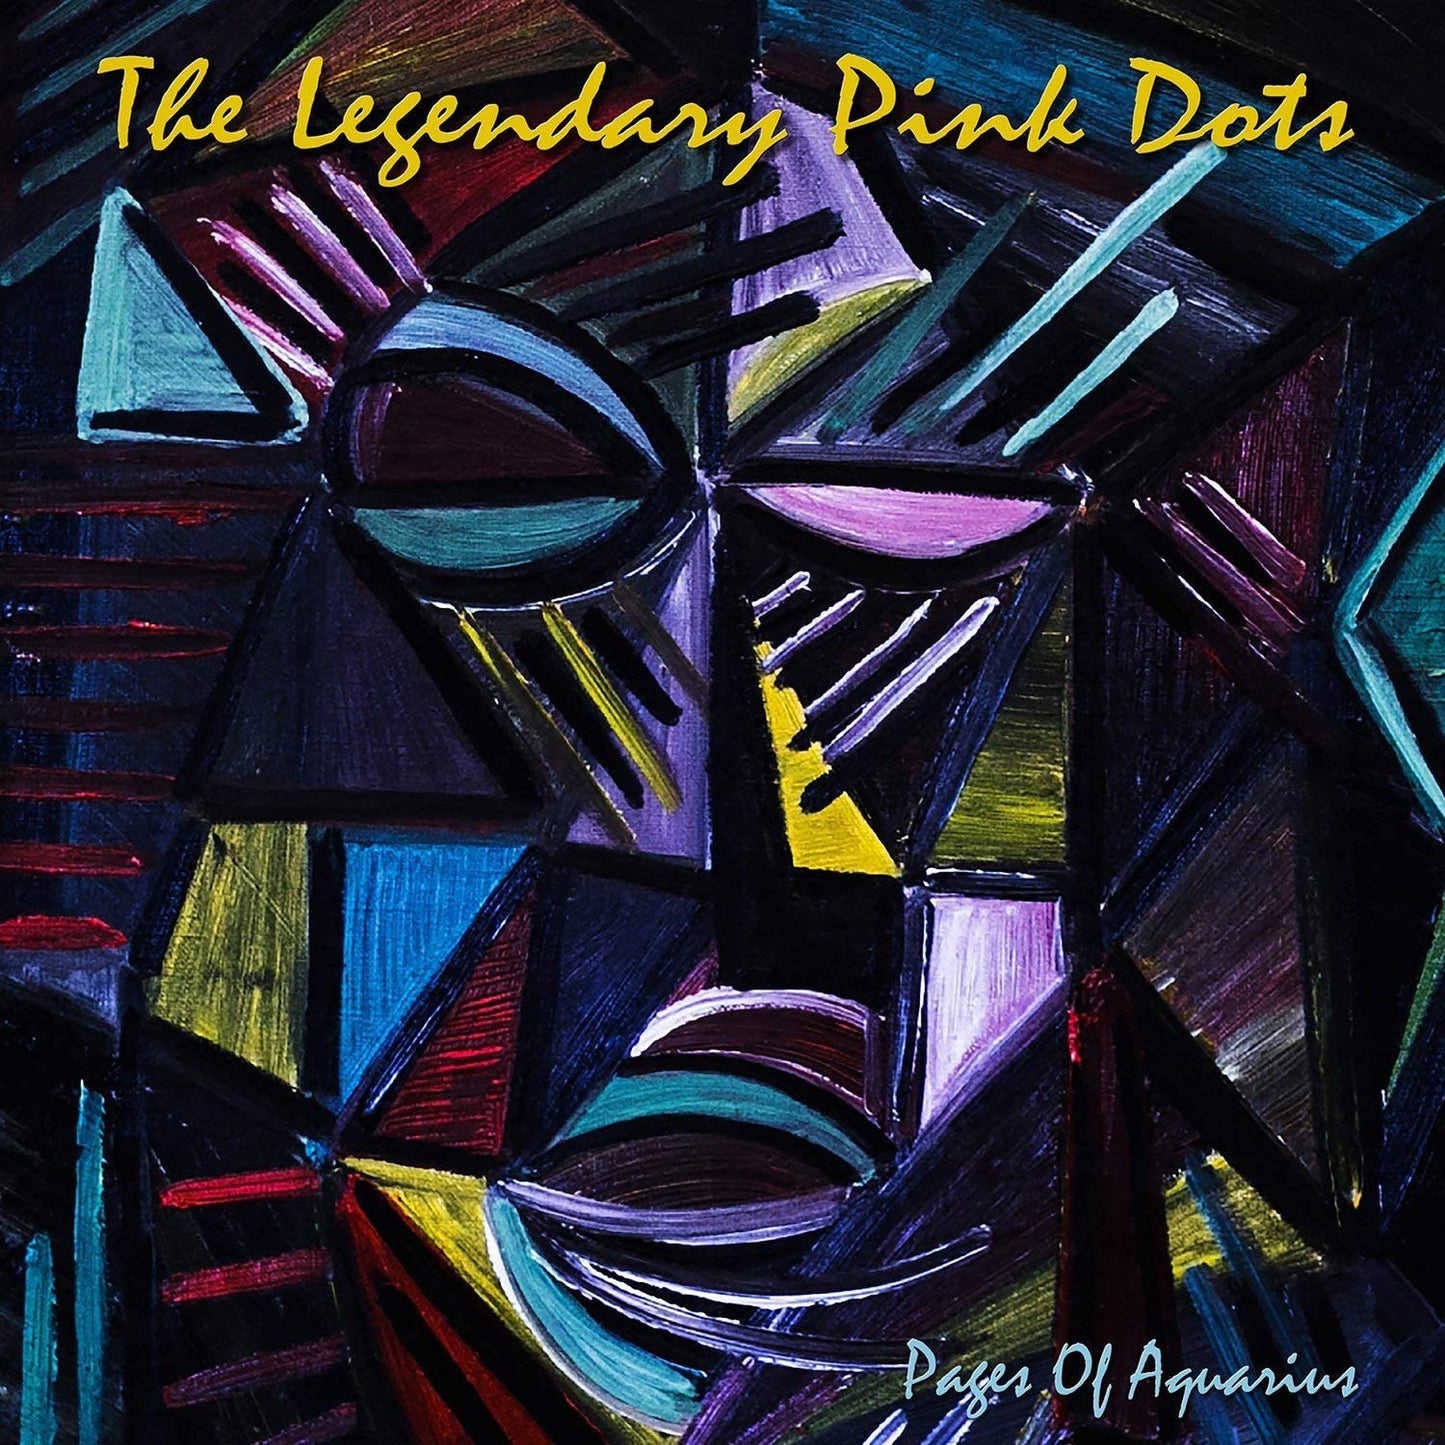 Legendary Pink Dots - Pages Of Aquarius - CD